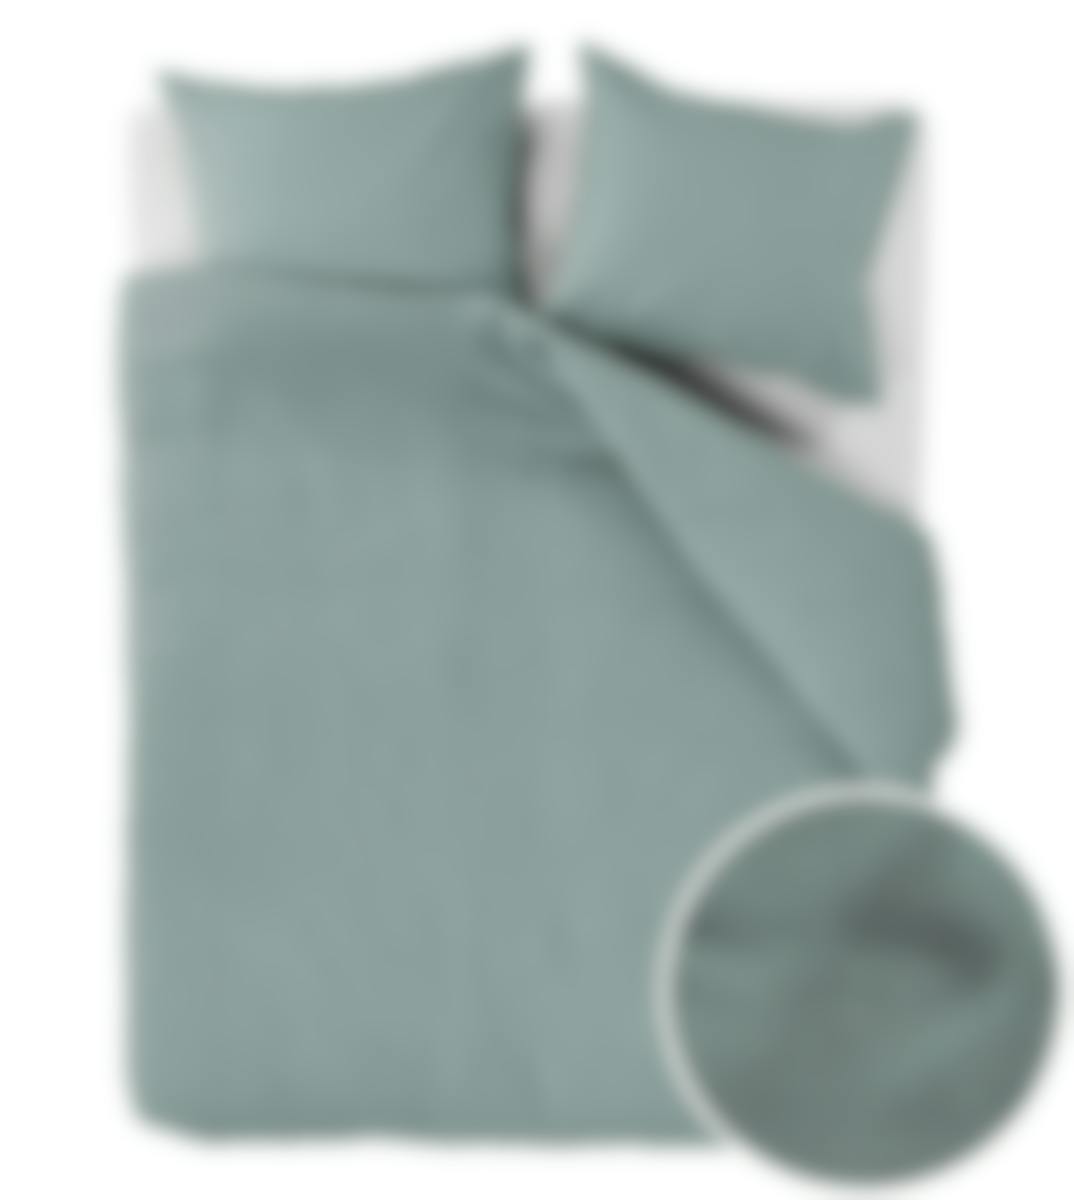 At Home by Beddinghouse housse de couette Relax Grey Green Waffle 200 x 200-220 cm